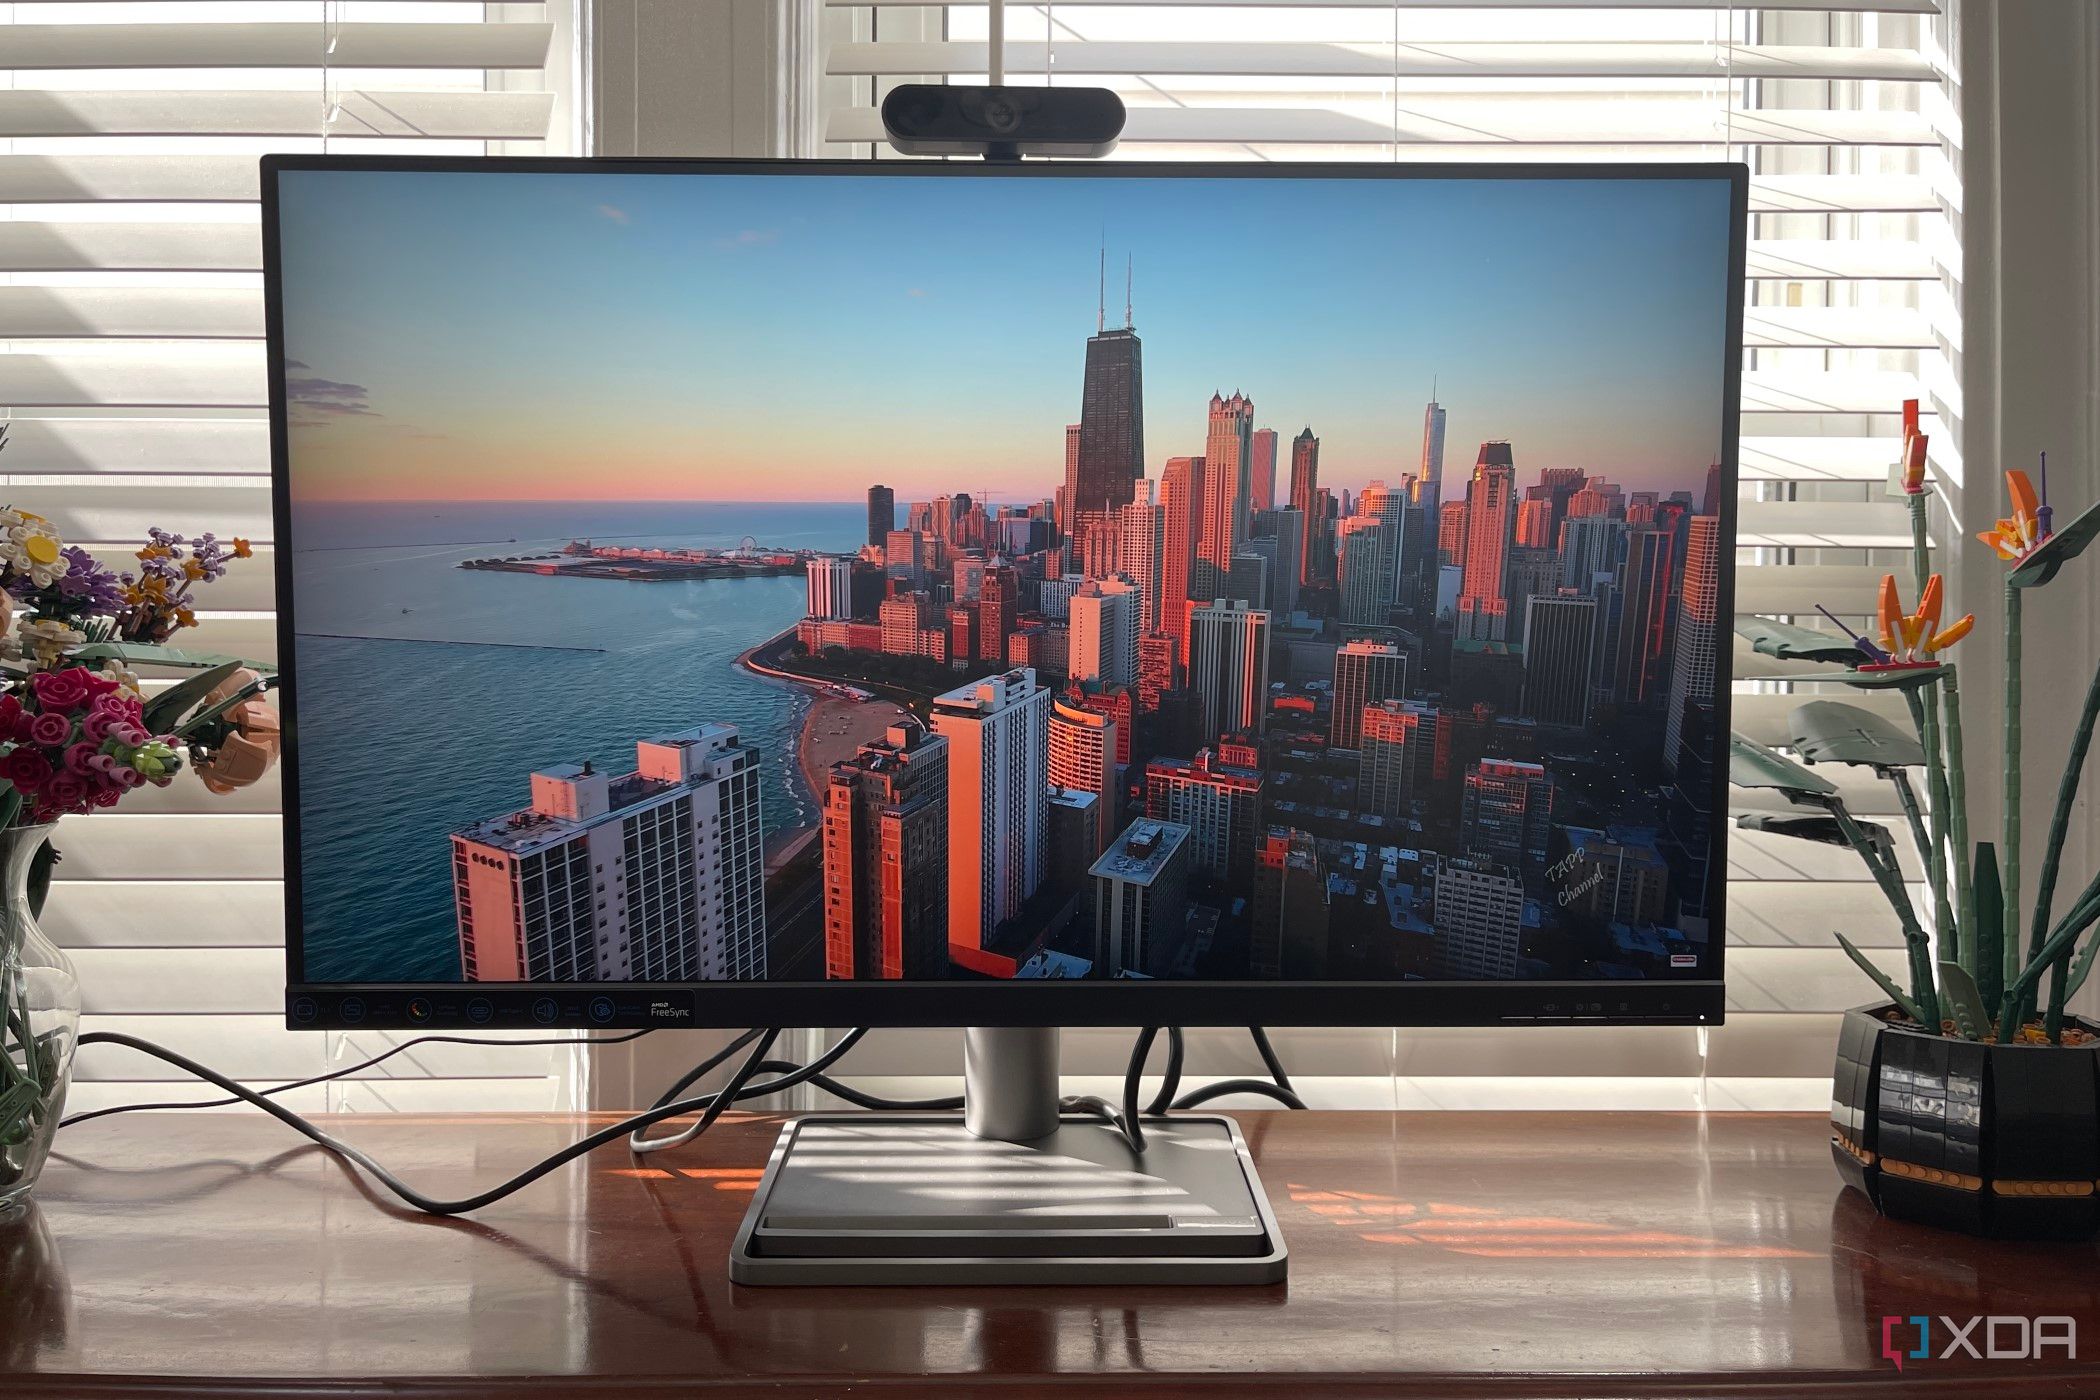 Lenovo L32P-30 Monitor showing an image of the Chicago skyline in the background